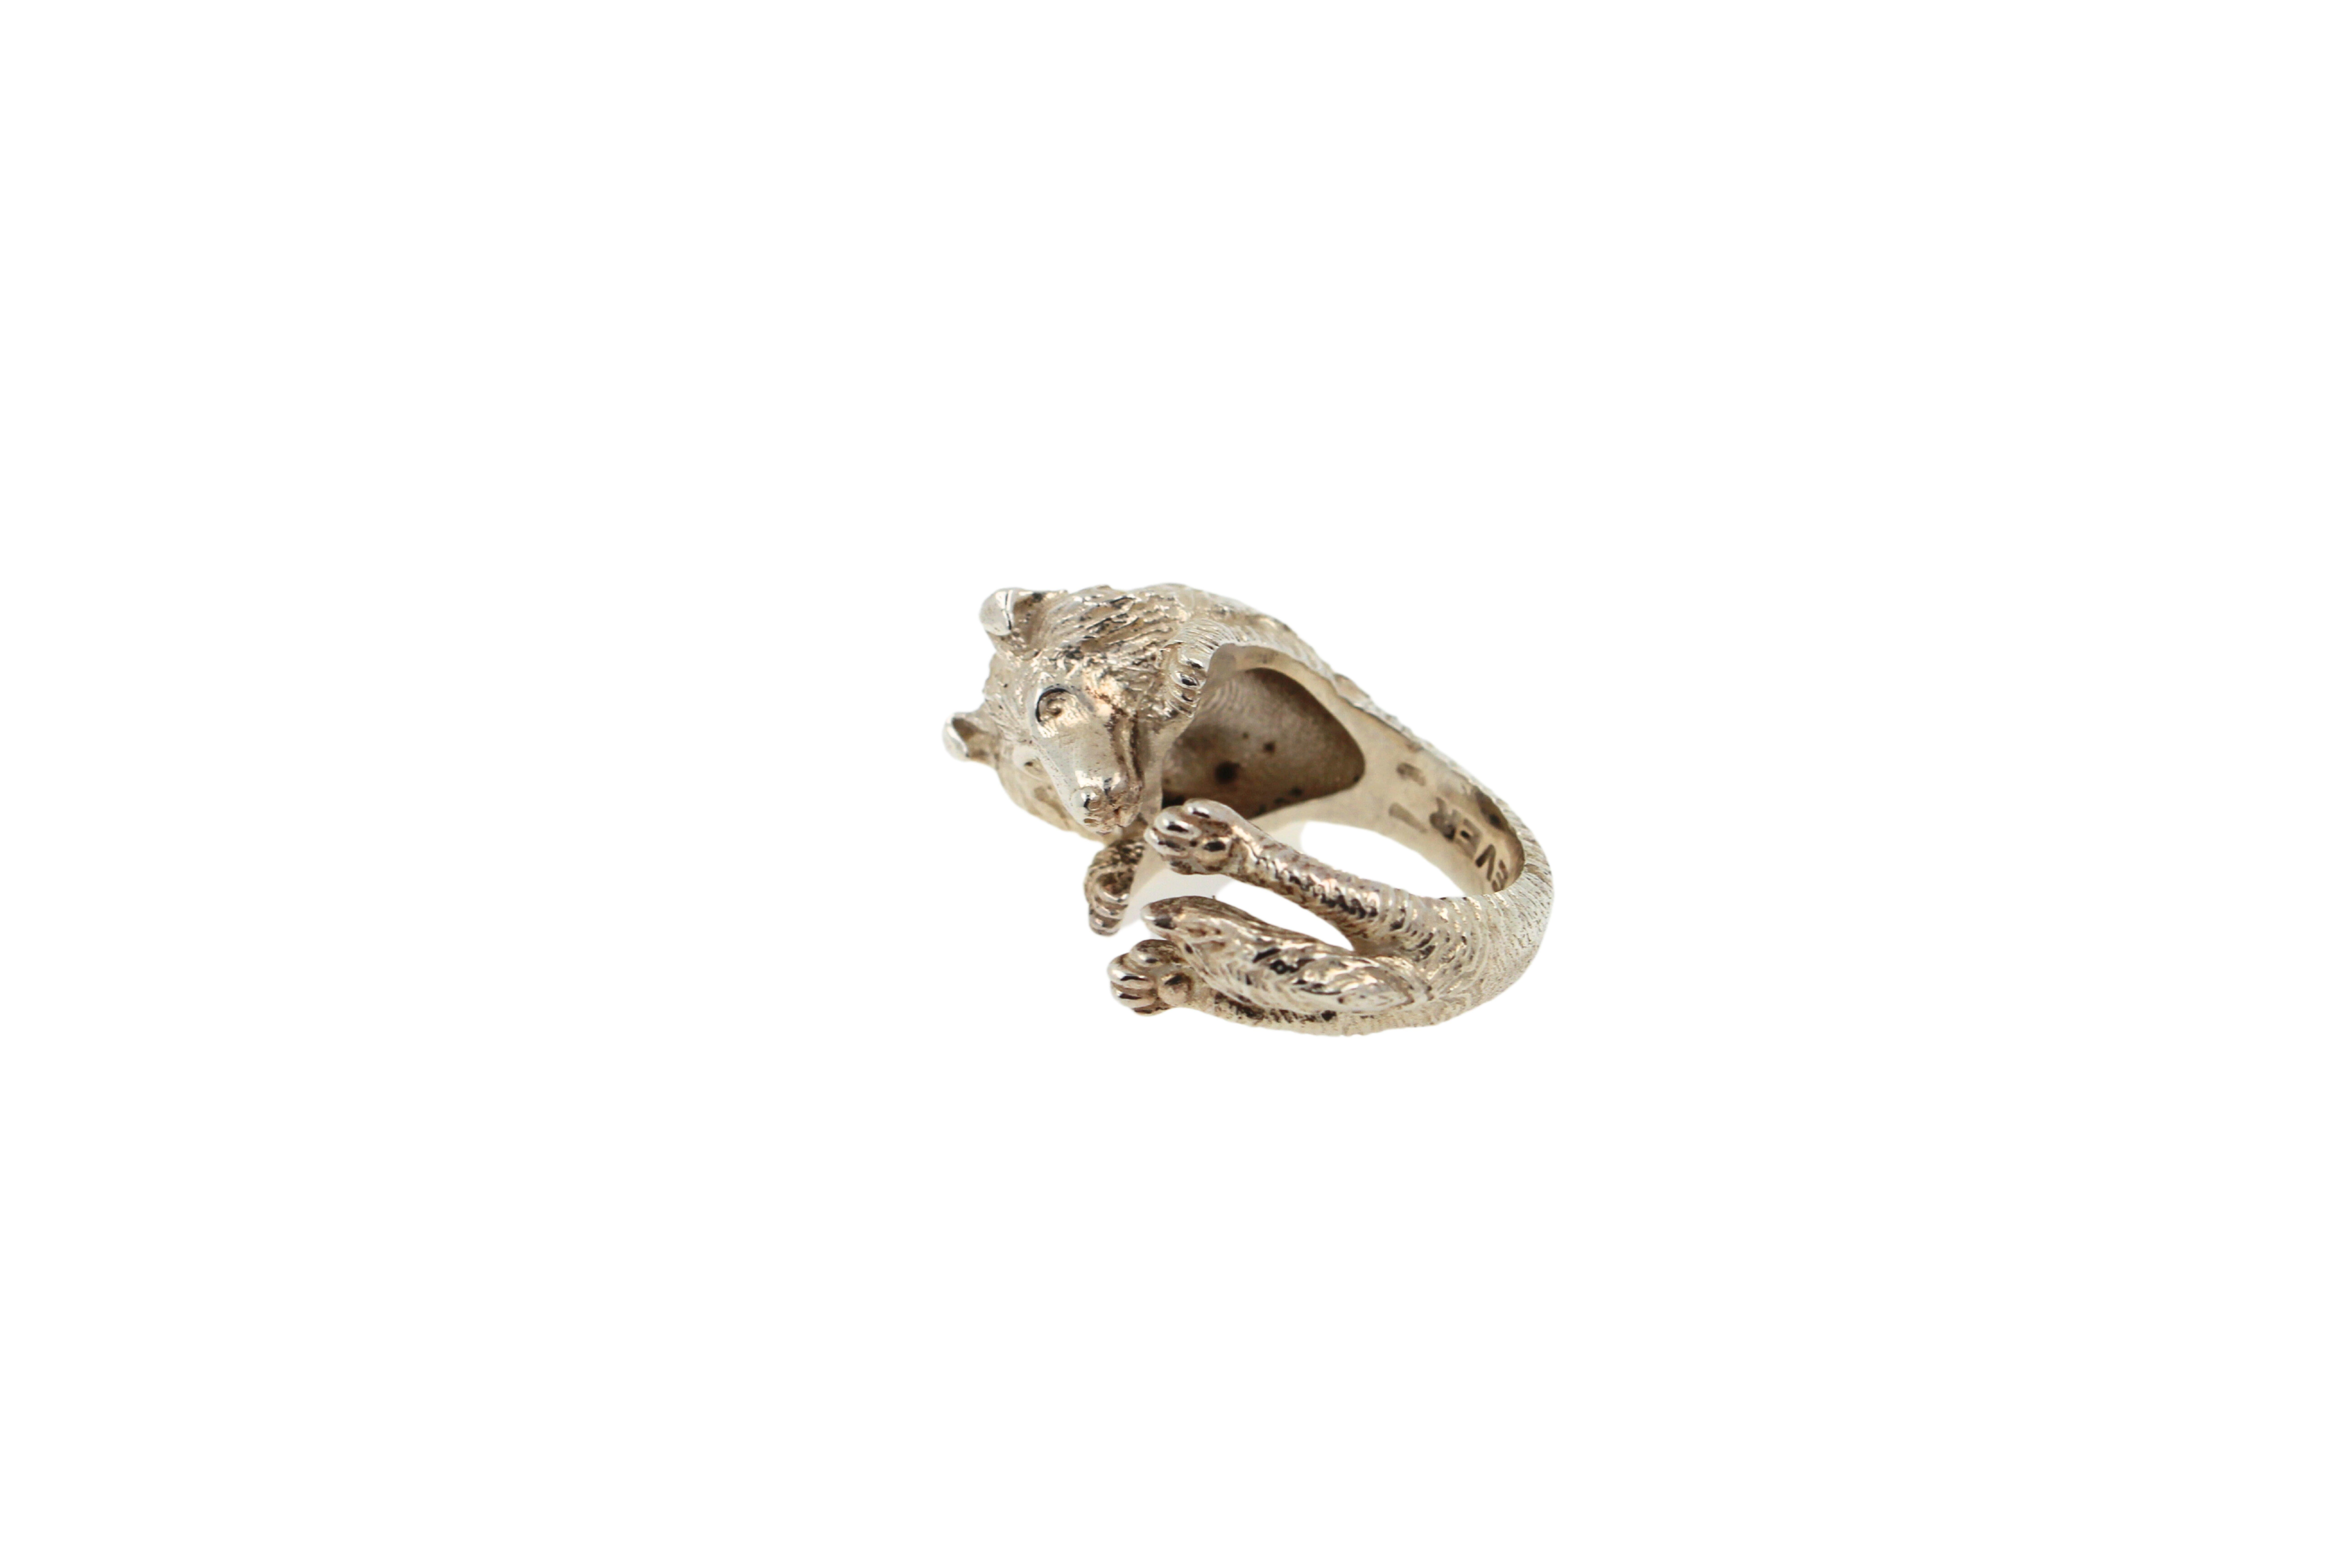 925 Sterling Silver Dog Puppy Animal Nature Cute Collie Statement Hug Open Ring
-Dog Fever sterling silver Hug ring faithfully portrays the iconic dog breed.
-Cute, fun and versatile
-925 Sterling Silver
-Entirely designed and handcrafted in